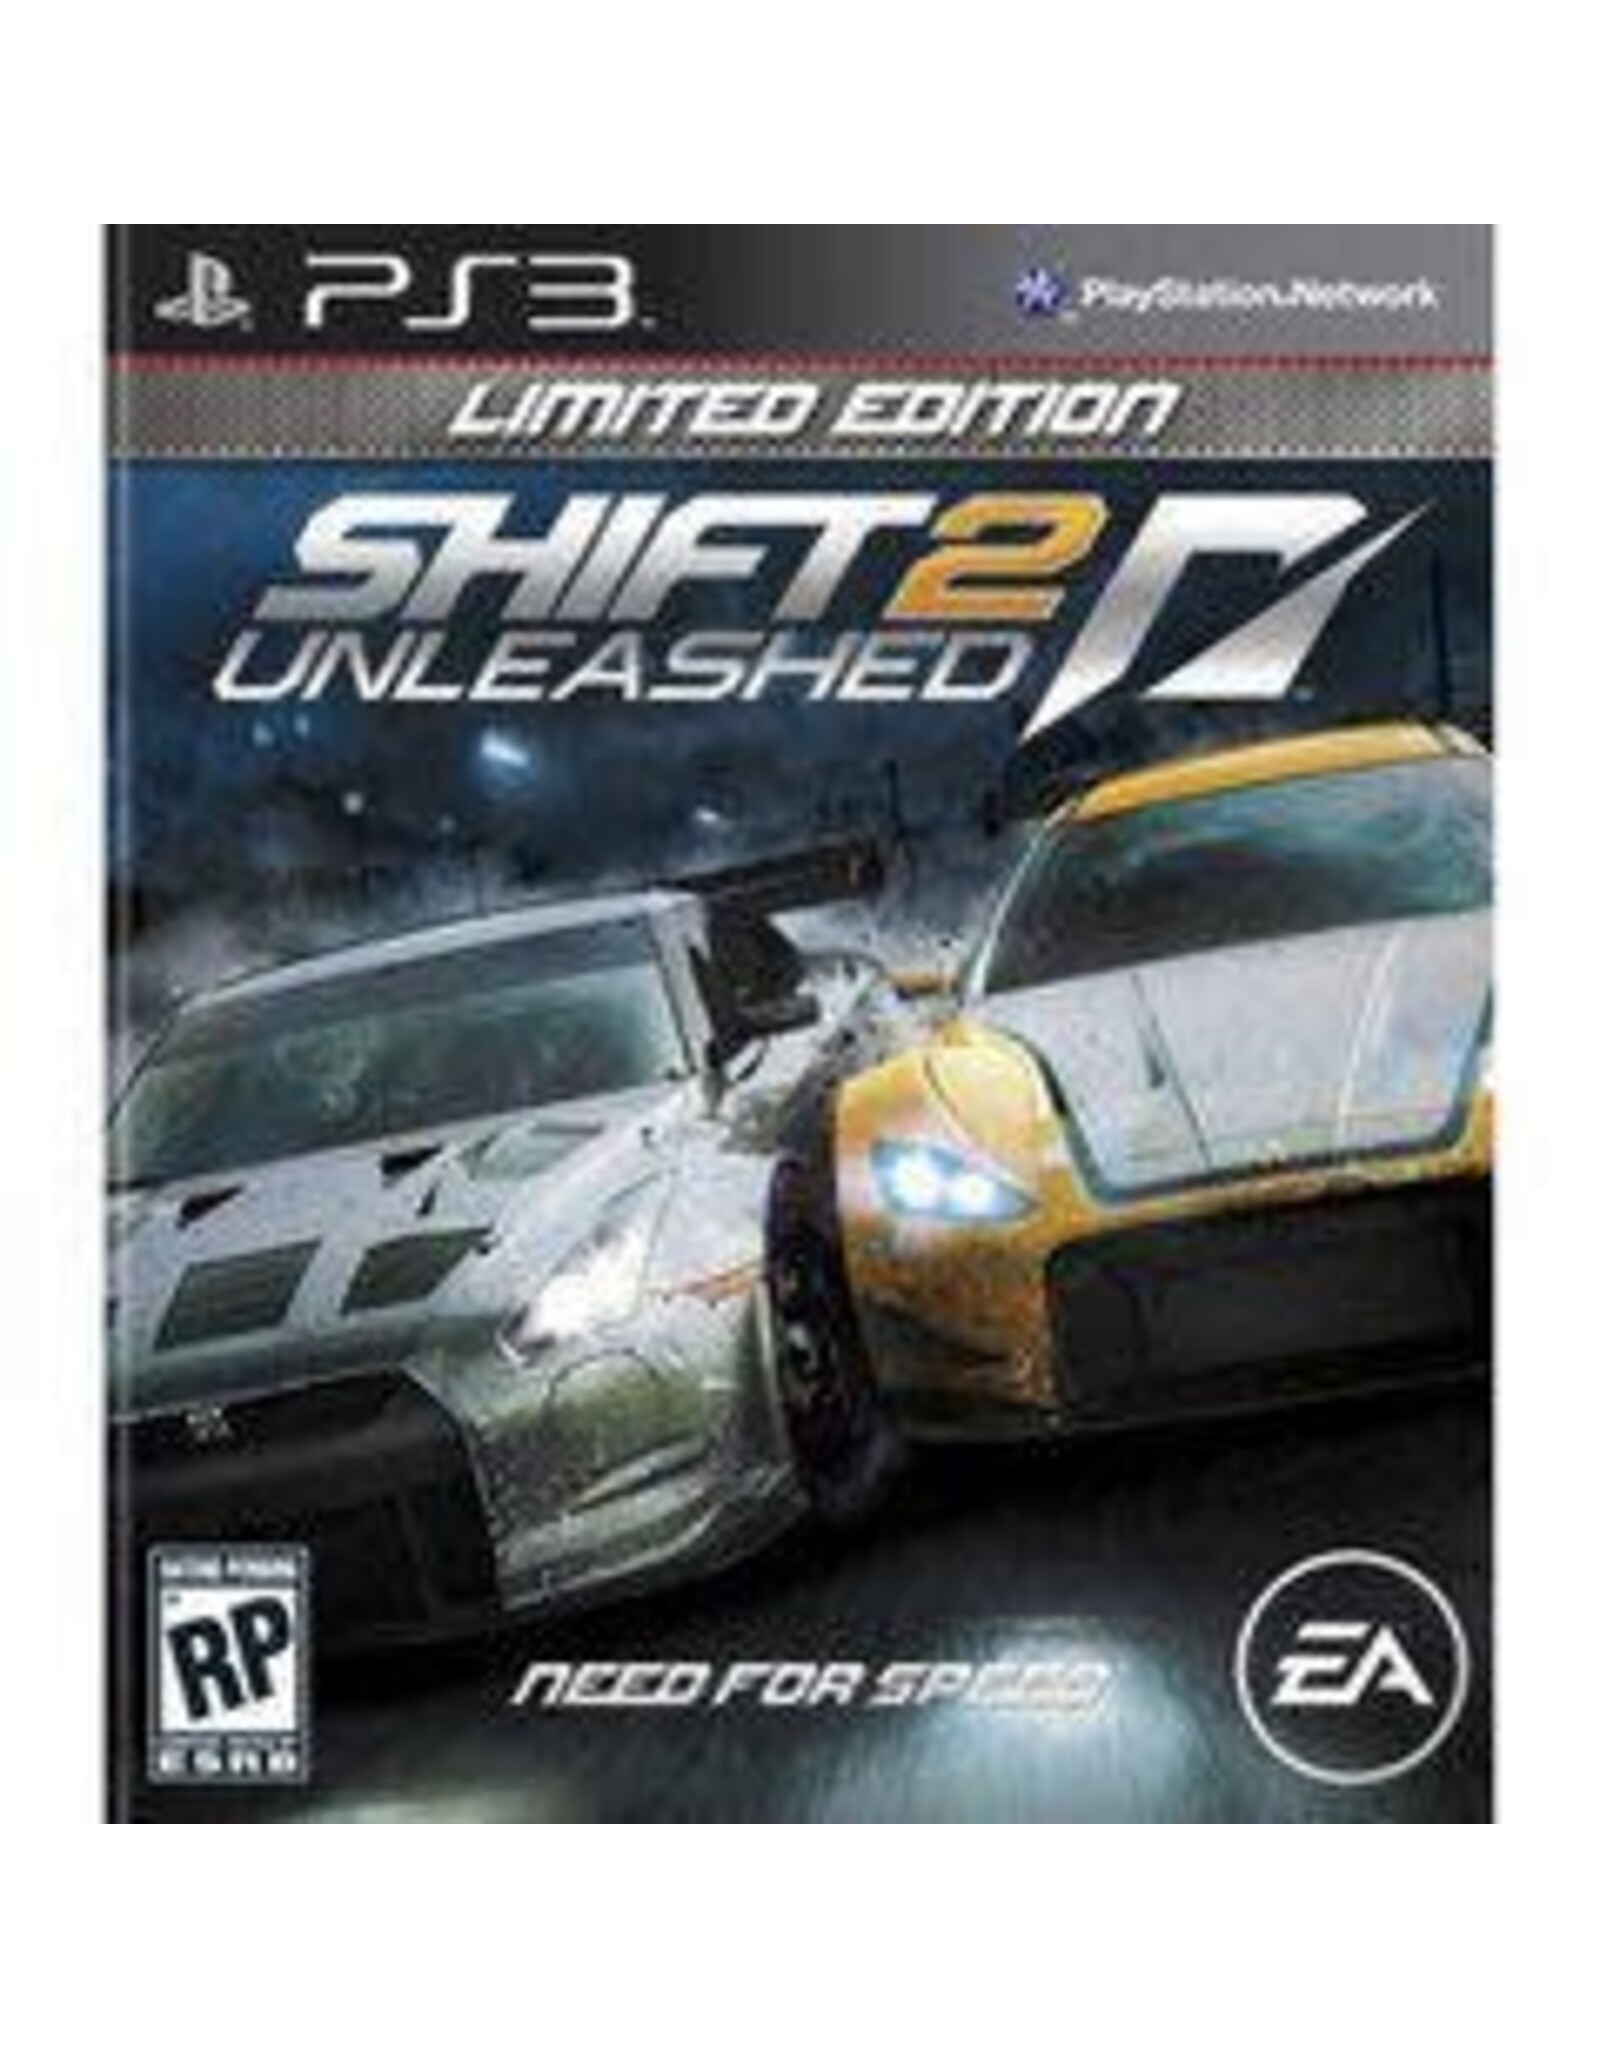 Playstation 3 Need For Speed Shift 2 Unleashed Limited Edition - No DLC (Used)